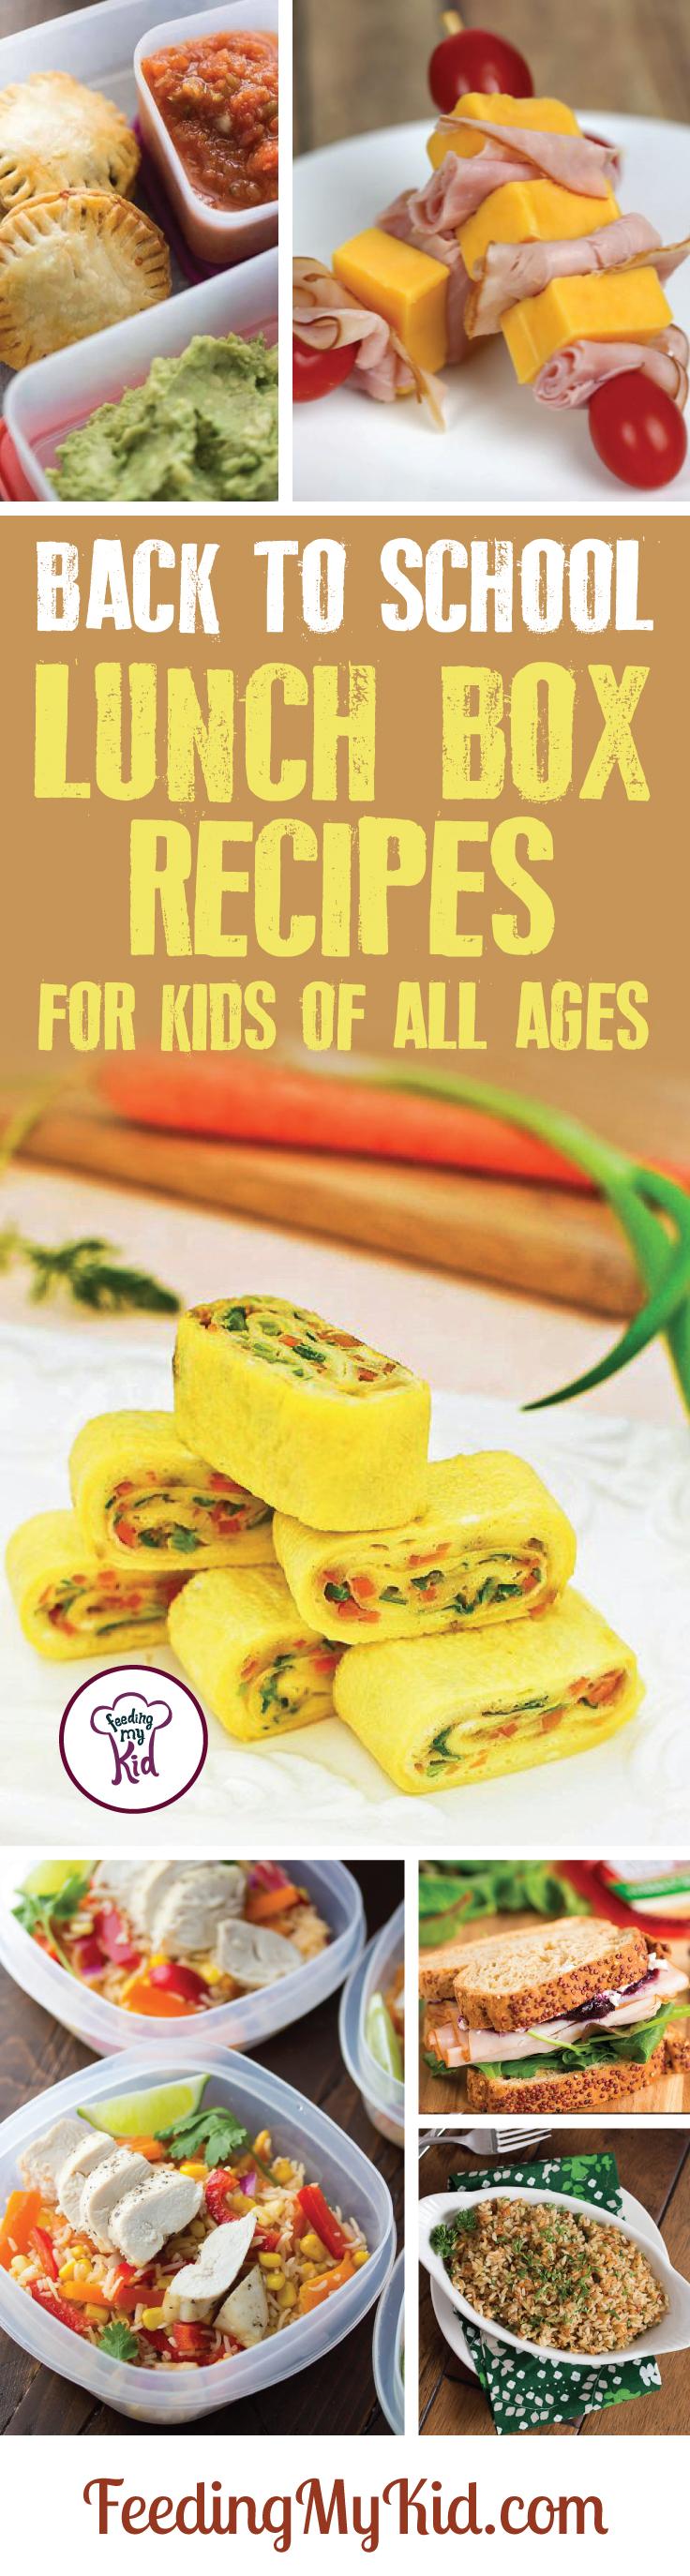 Check out these great lunch box recipes for kids! These lunch ideas are perfect for -back-to-school and everyday lunches.